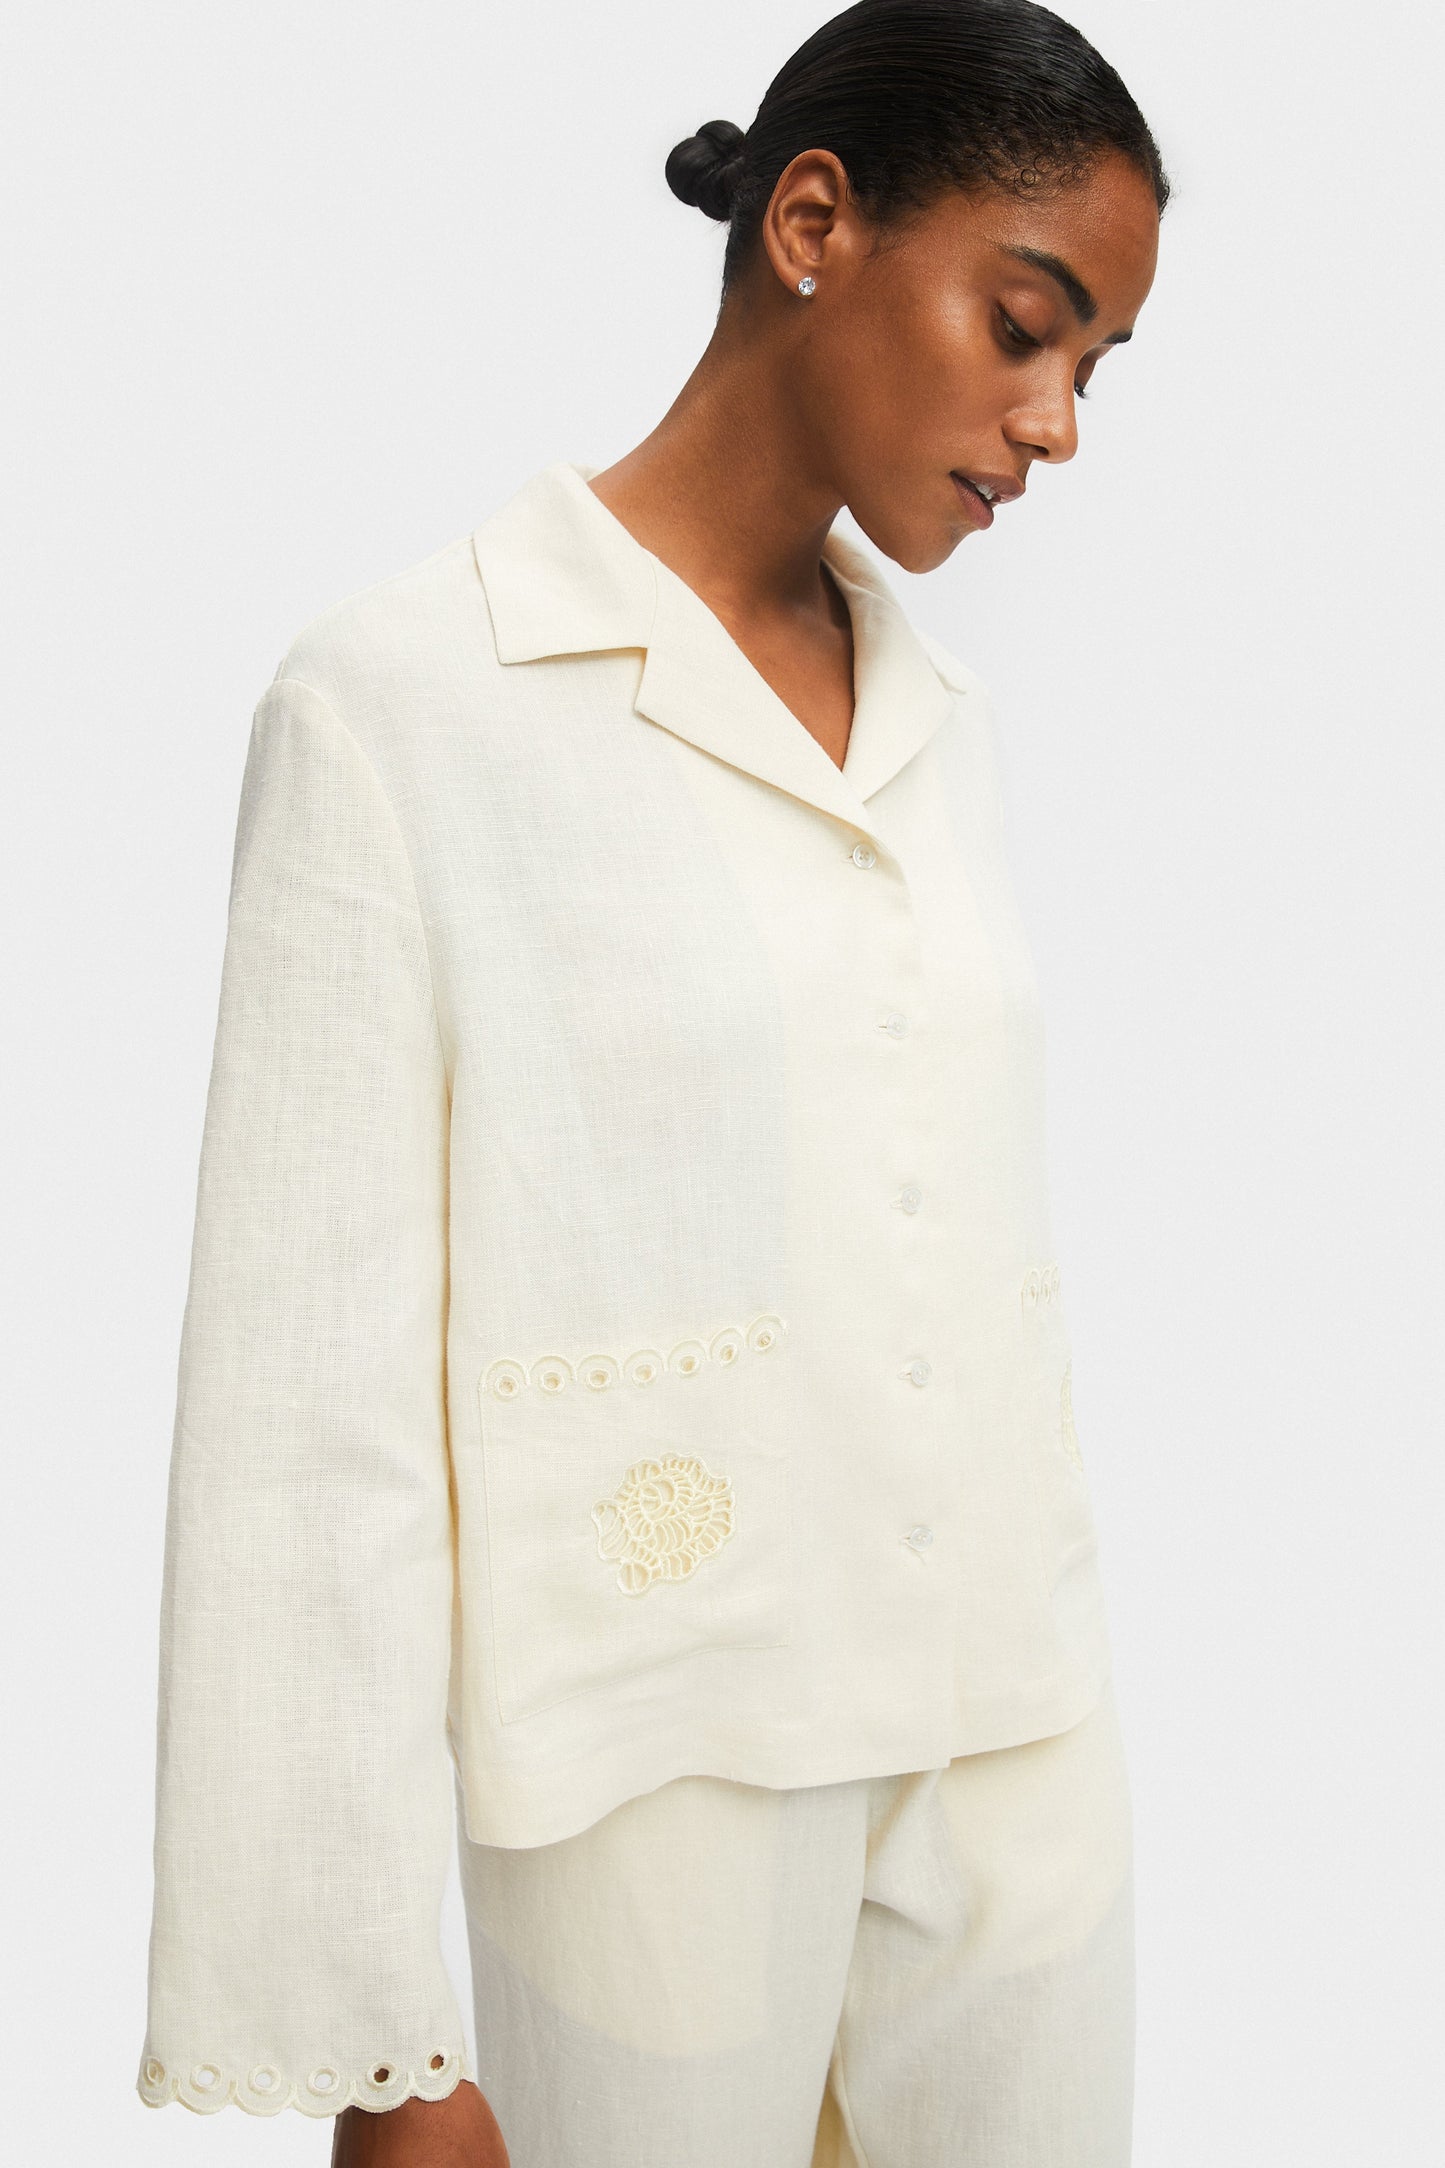 Sofia Linen Embroidered Shirt in Off-White